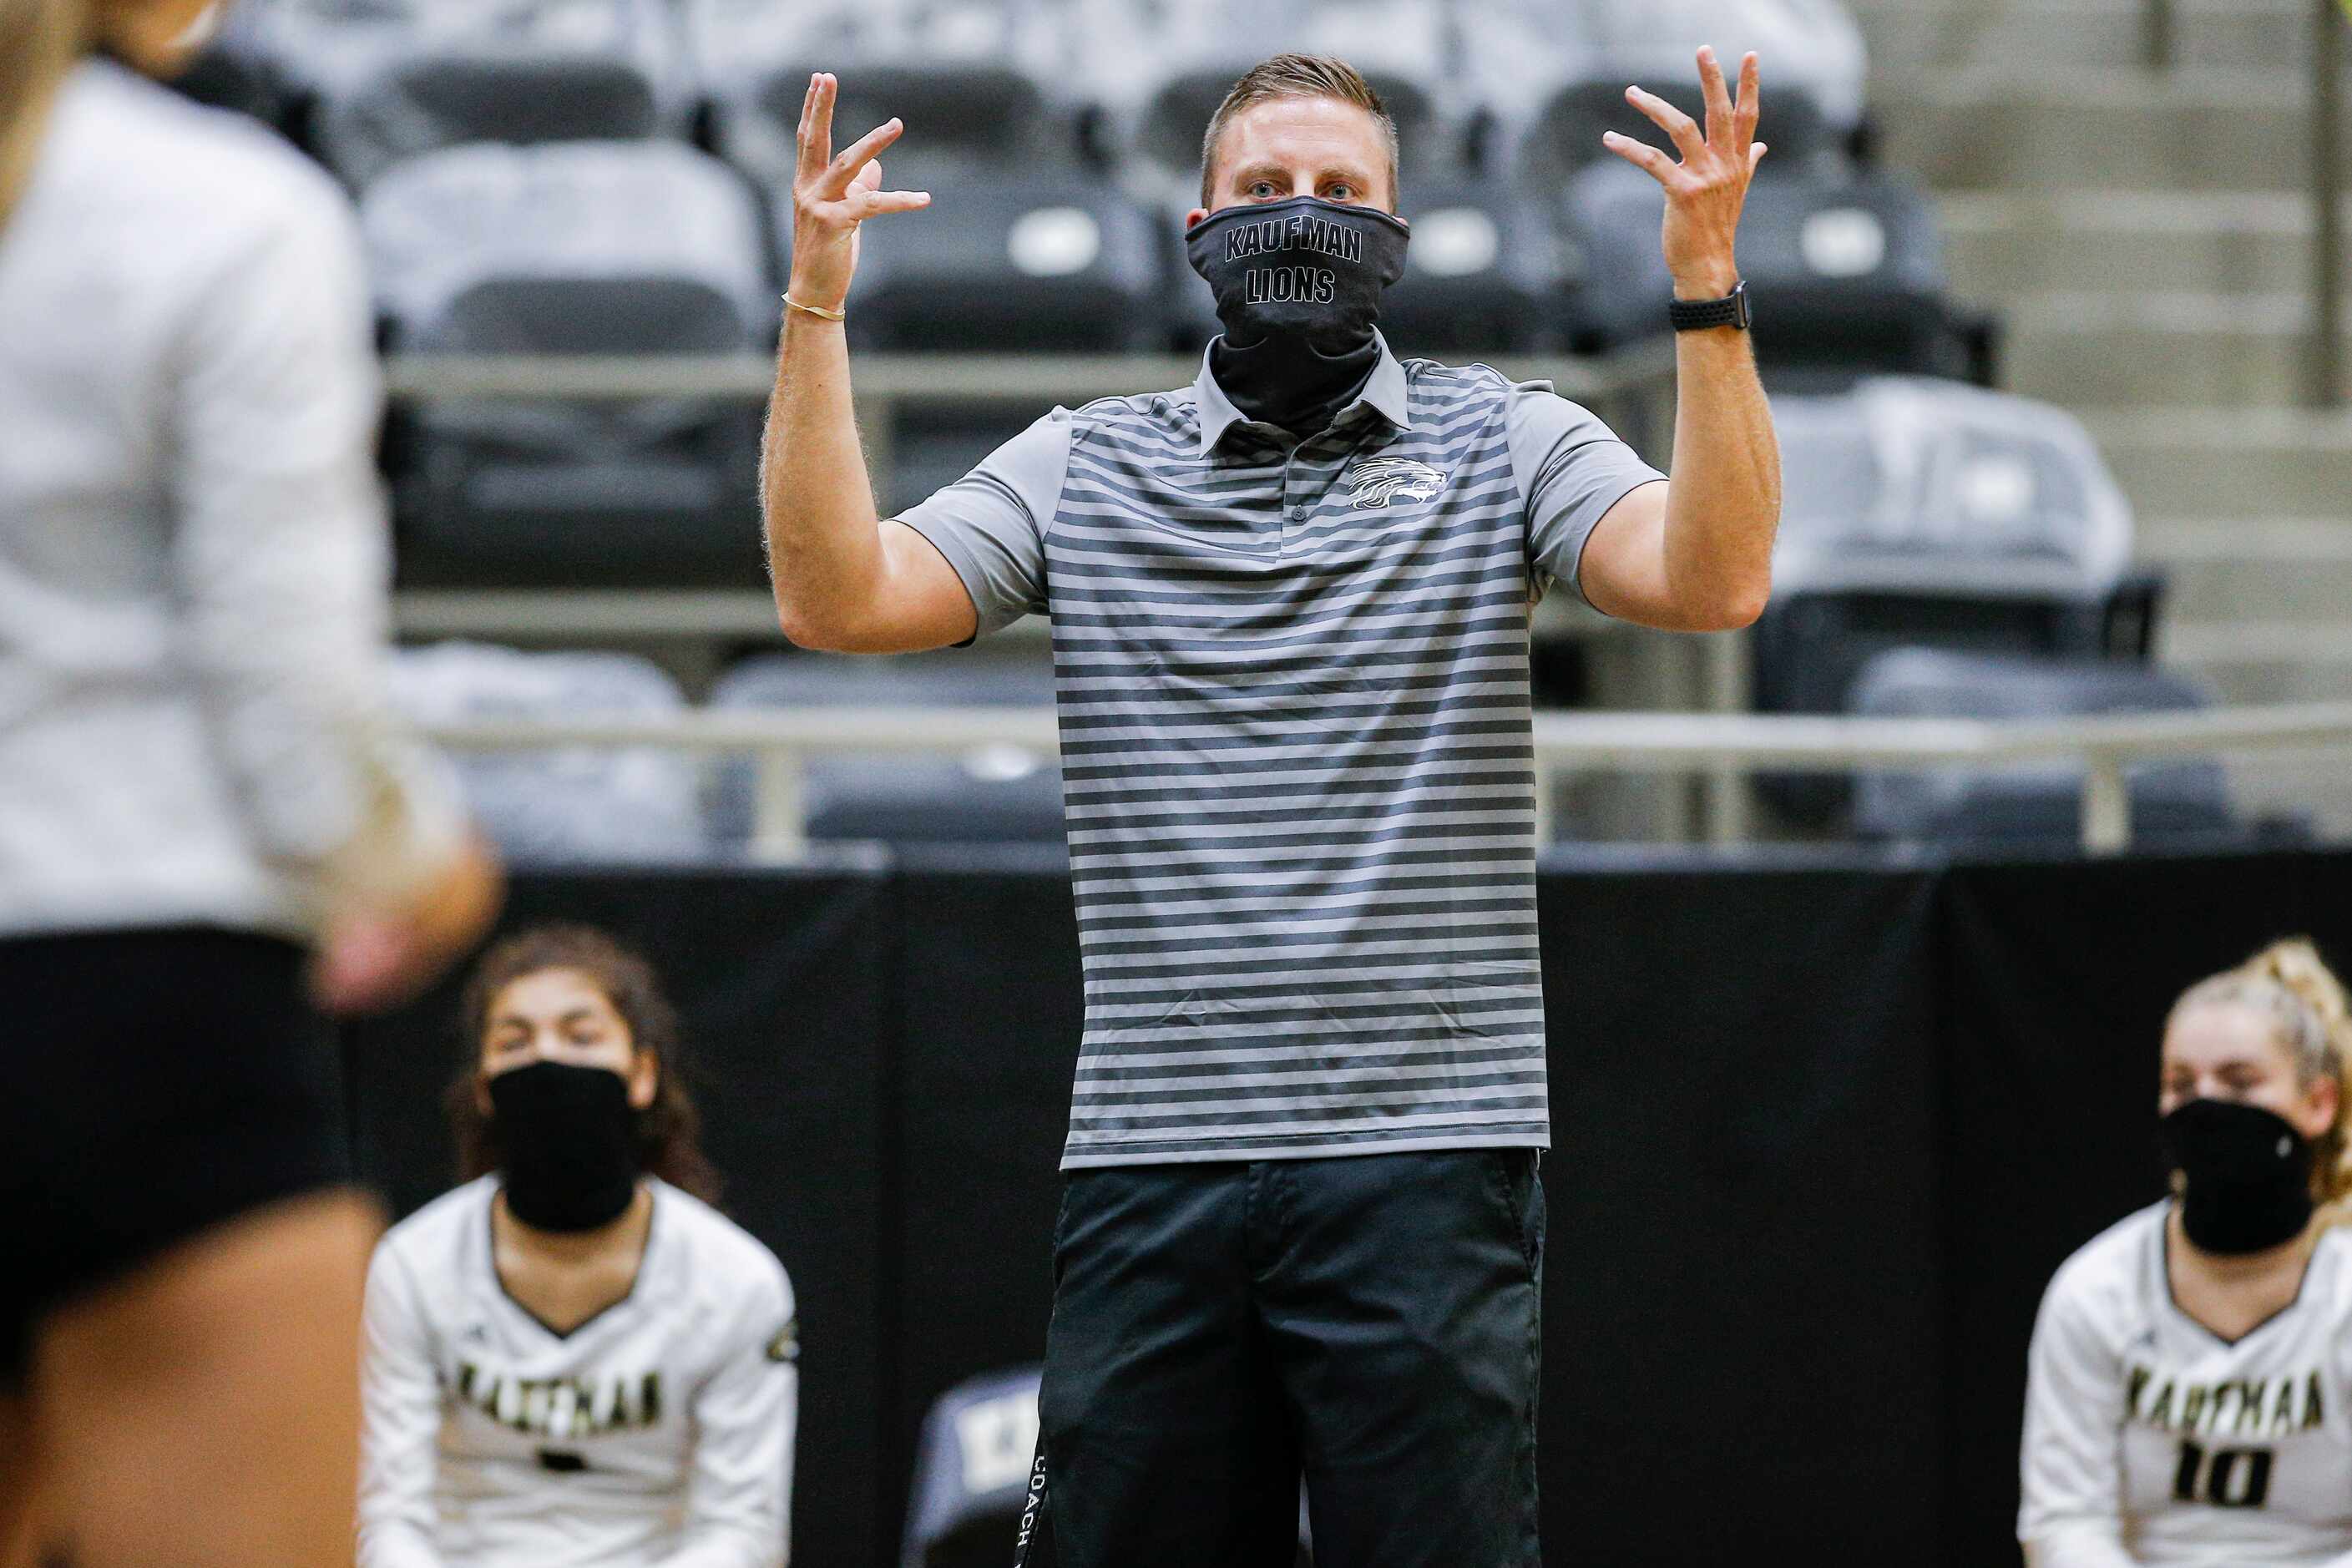 Kaufman head volleyball coach Jeff Maly
gives instructions to his players during a high...